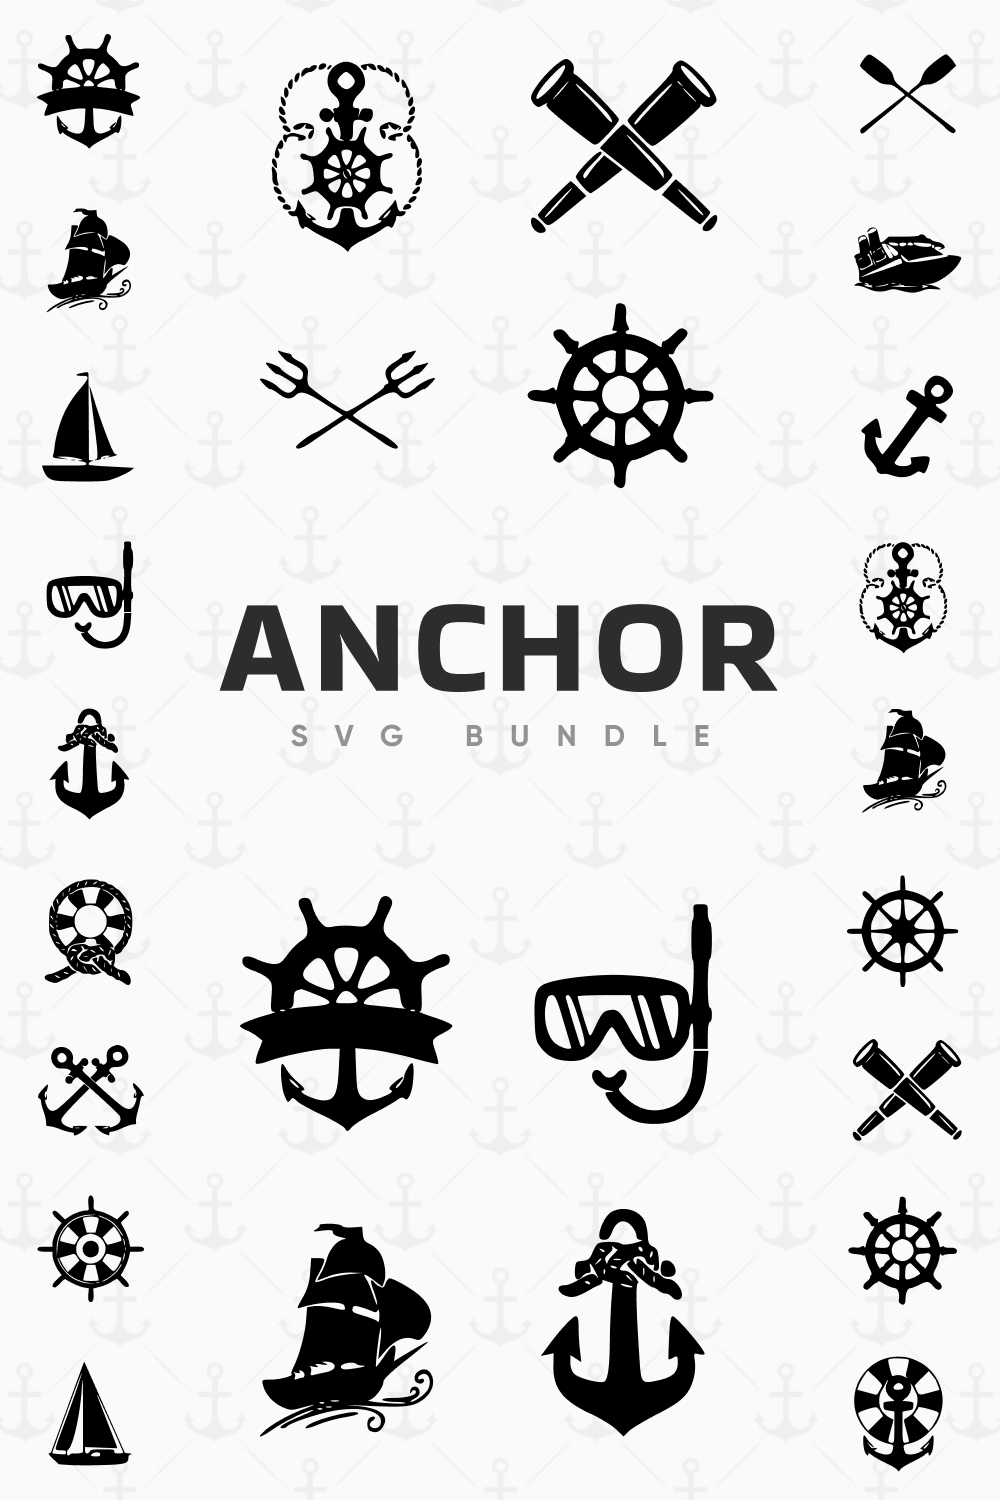 Images of Marine Symbols and Accessories (anchors, helms, trident, spyglasses, ships).